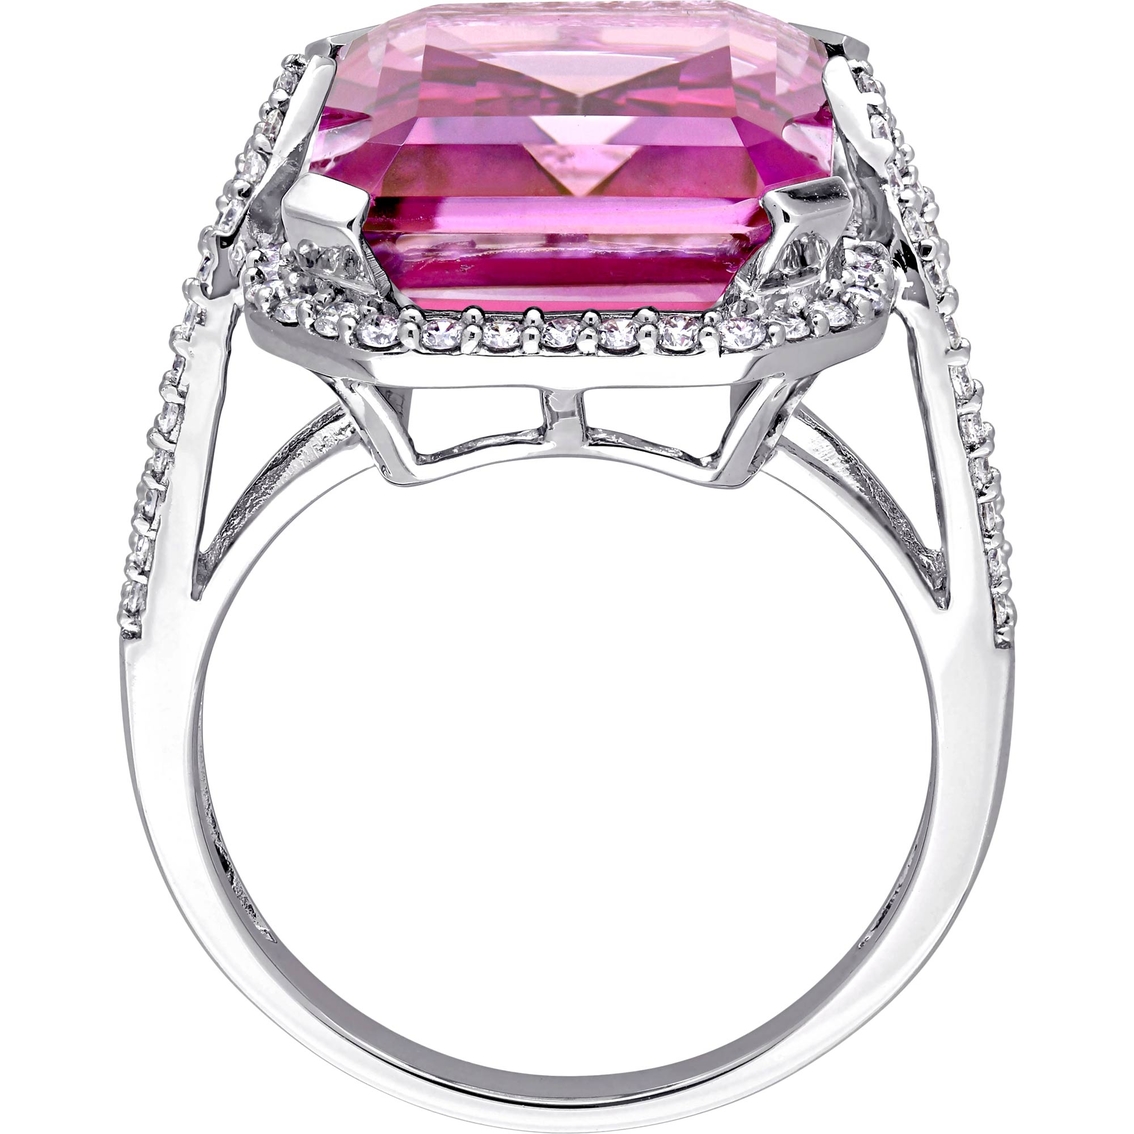 Sofia B. 14K White Gold 1/2 CTW Diamond Pink Topaz and Cocktail Ring - Image 3 of 4